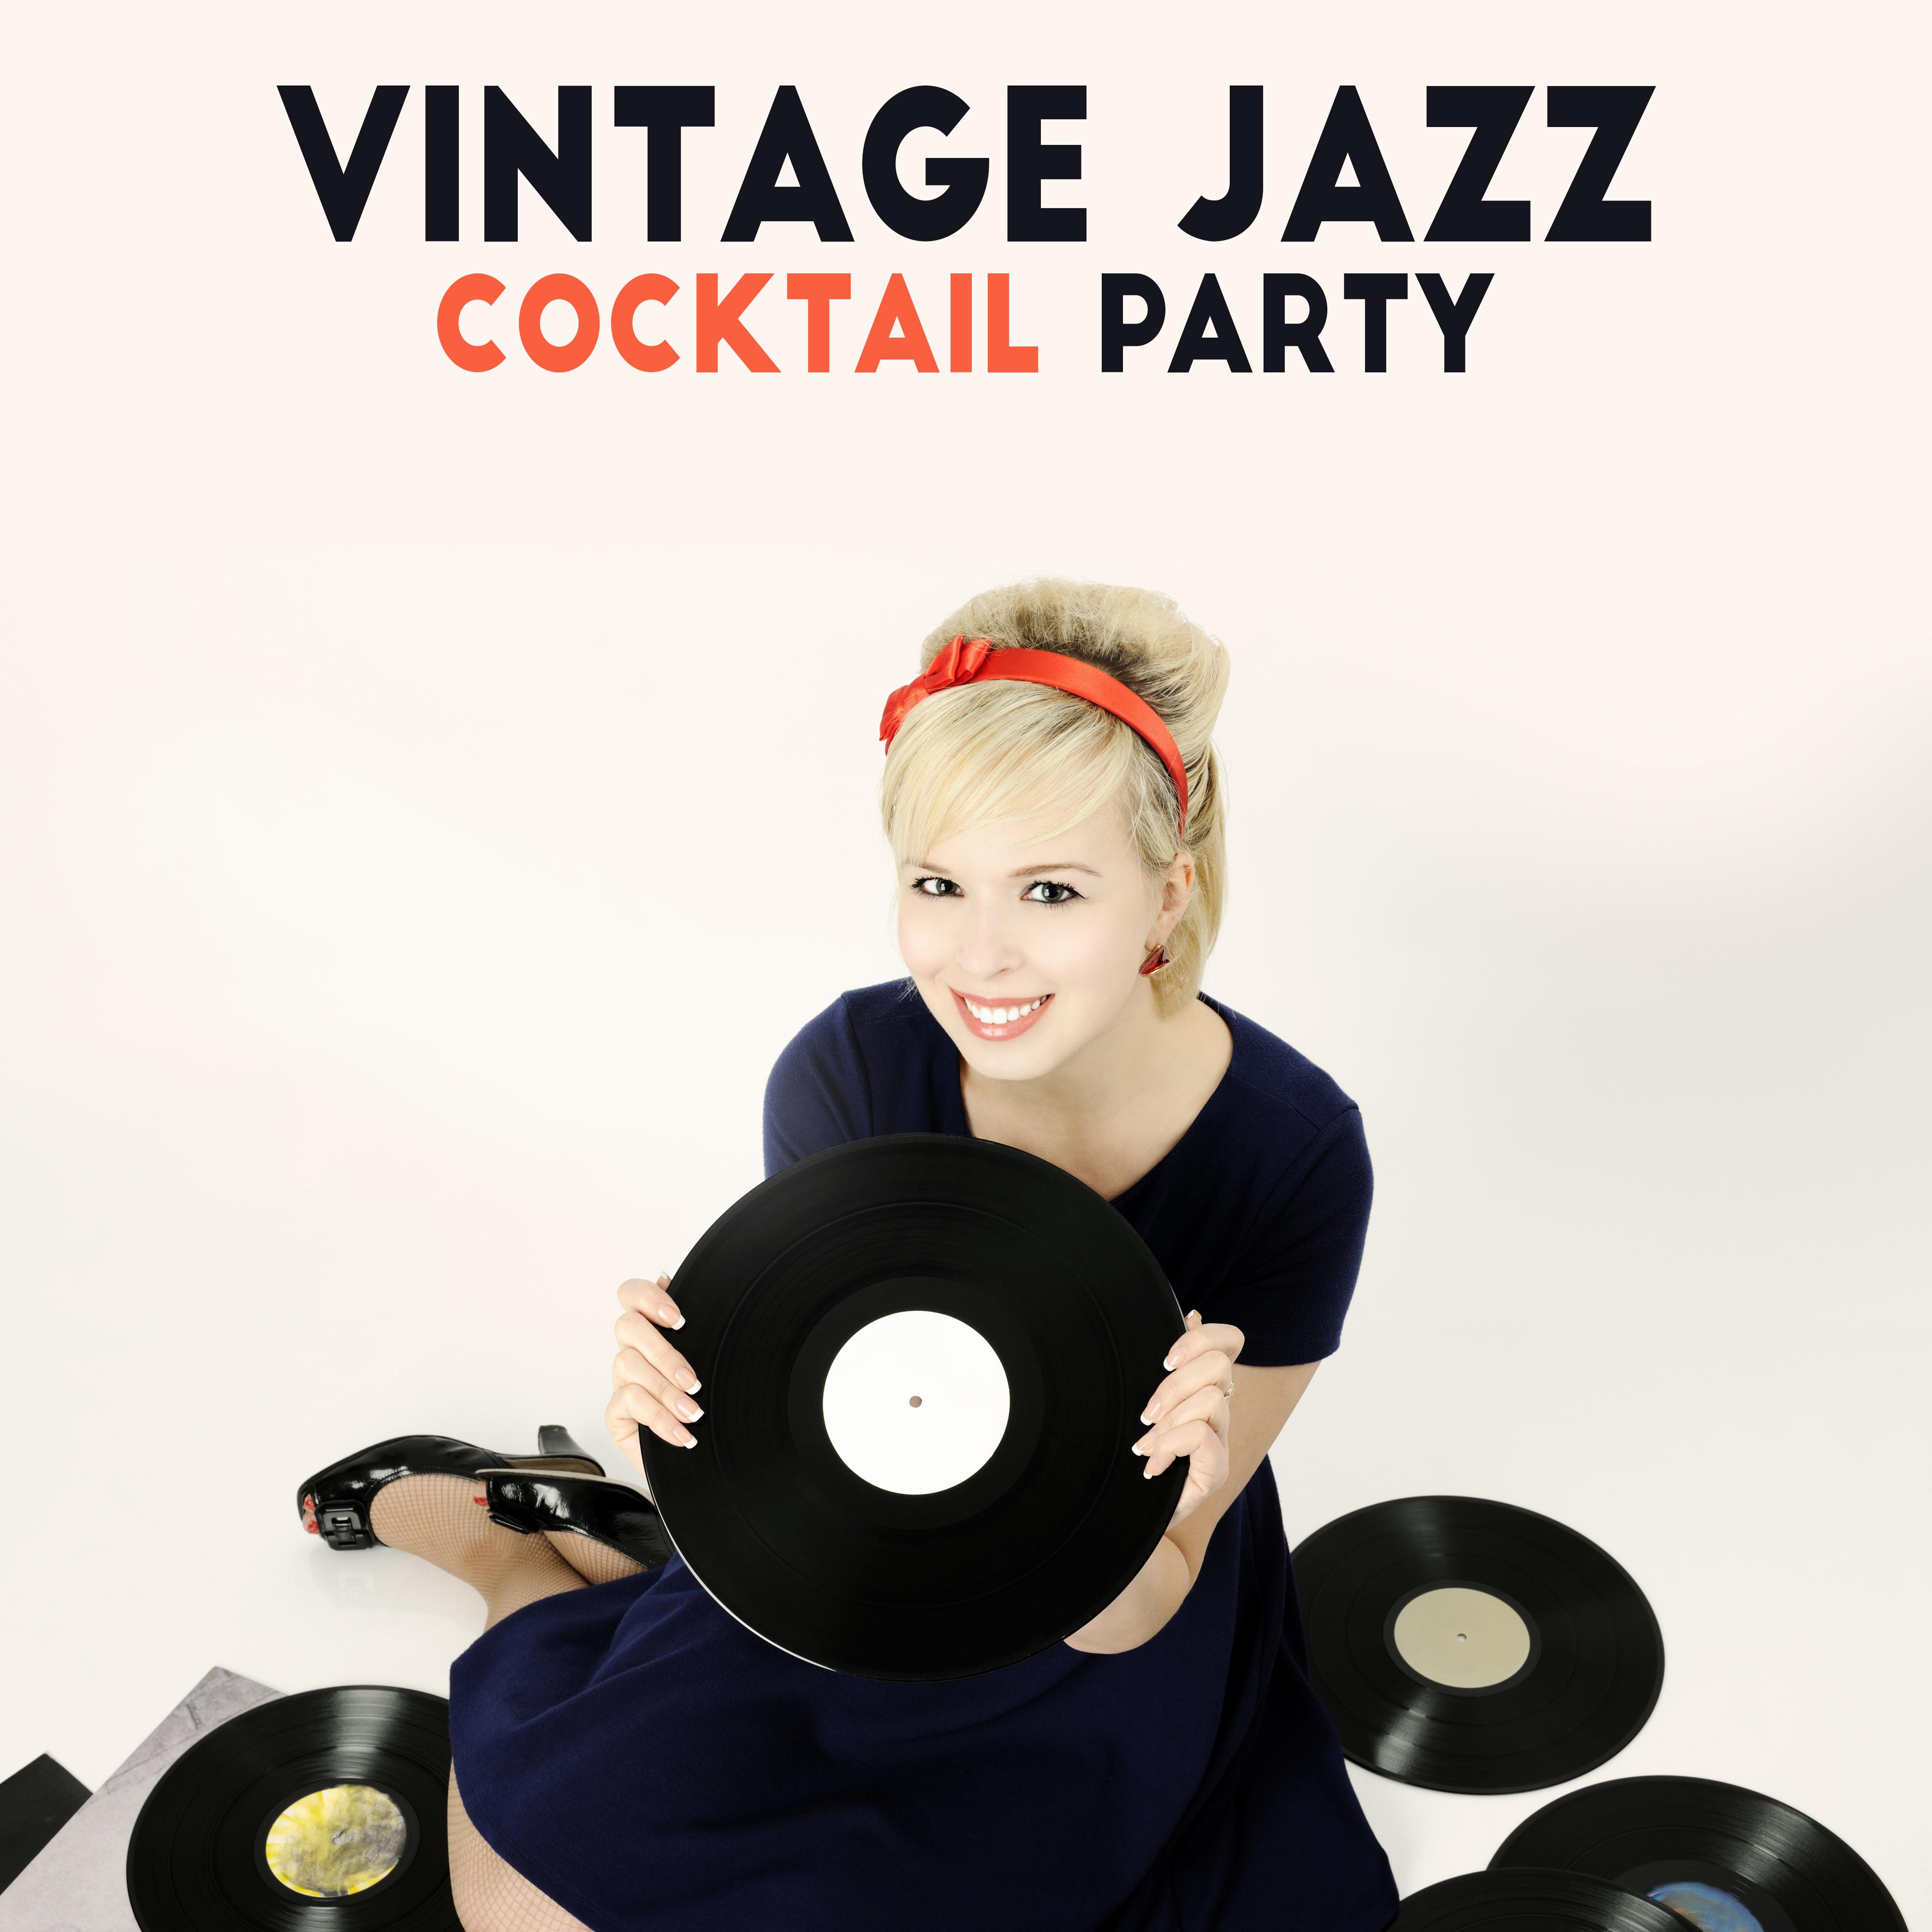 Vintage Jazz Cocktail Party: Compilation of Best Dance Party Smooth Jazz Music 2019, Vintage Melodies & Sounds of Piano, Sax & Others